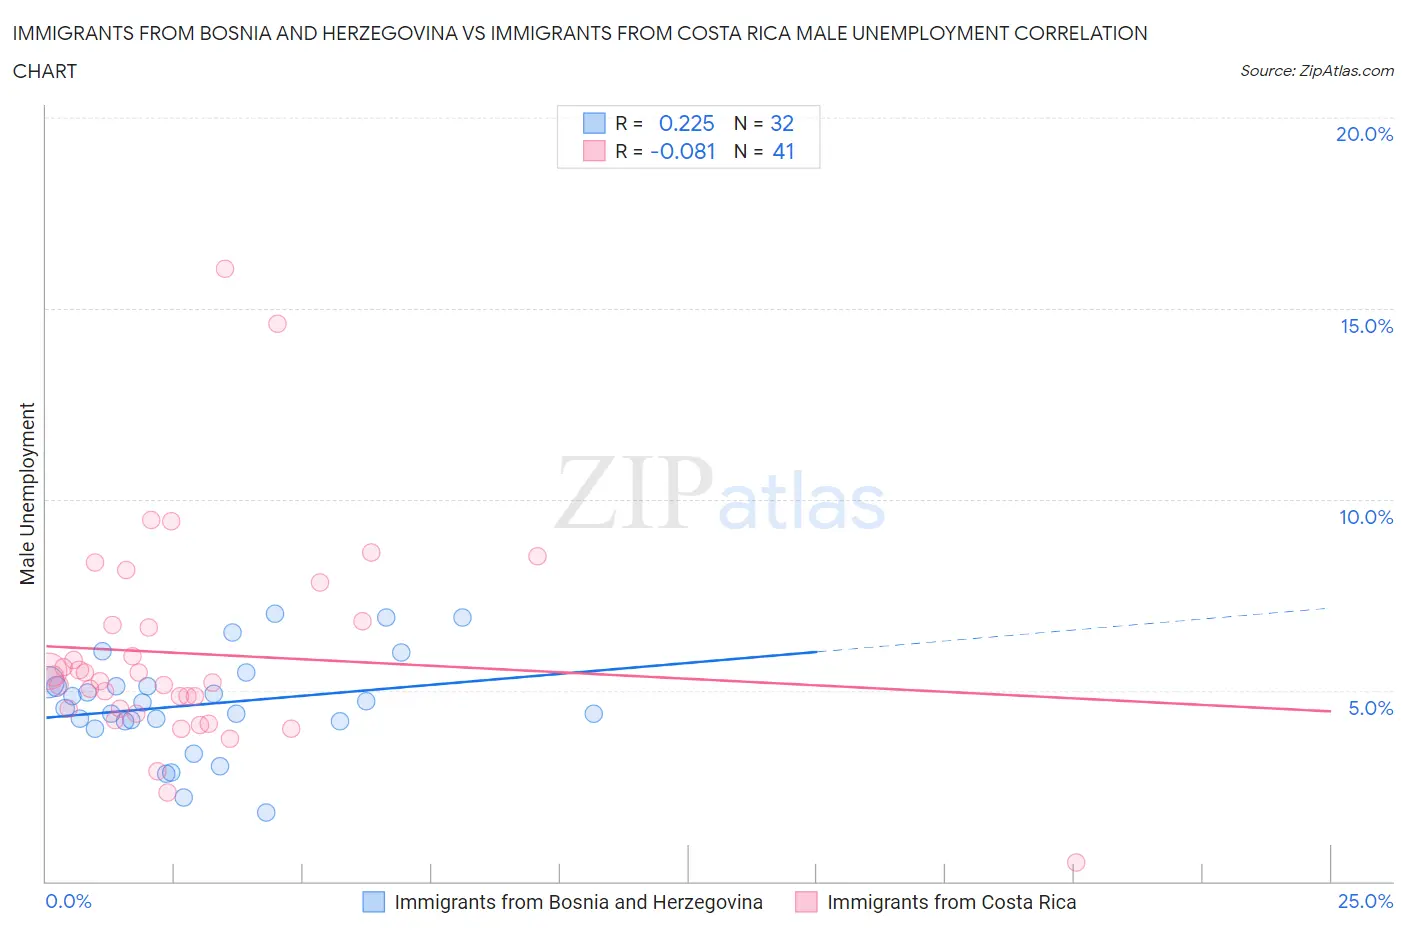 Immigrants from Bosnia and Herzegovina vs Immigrants from Costa Rica Male Unemployment